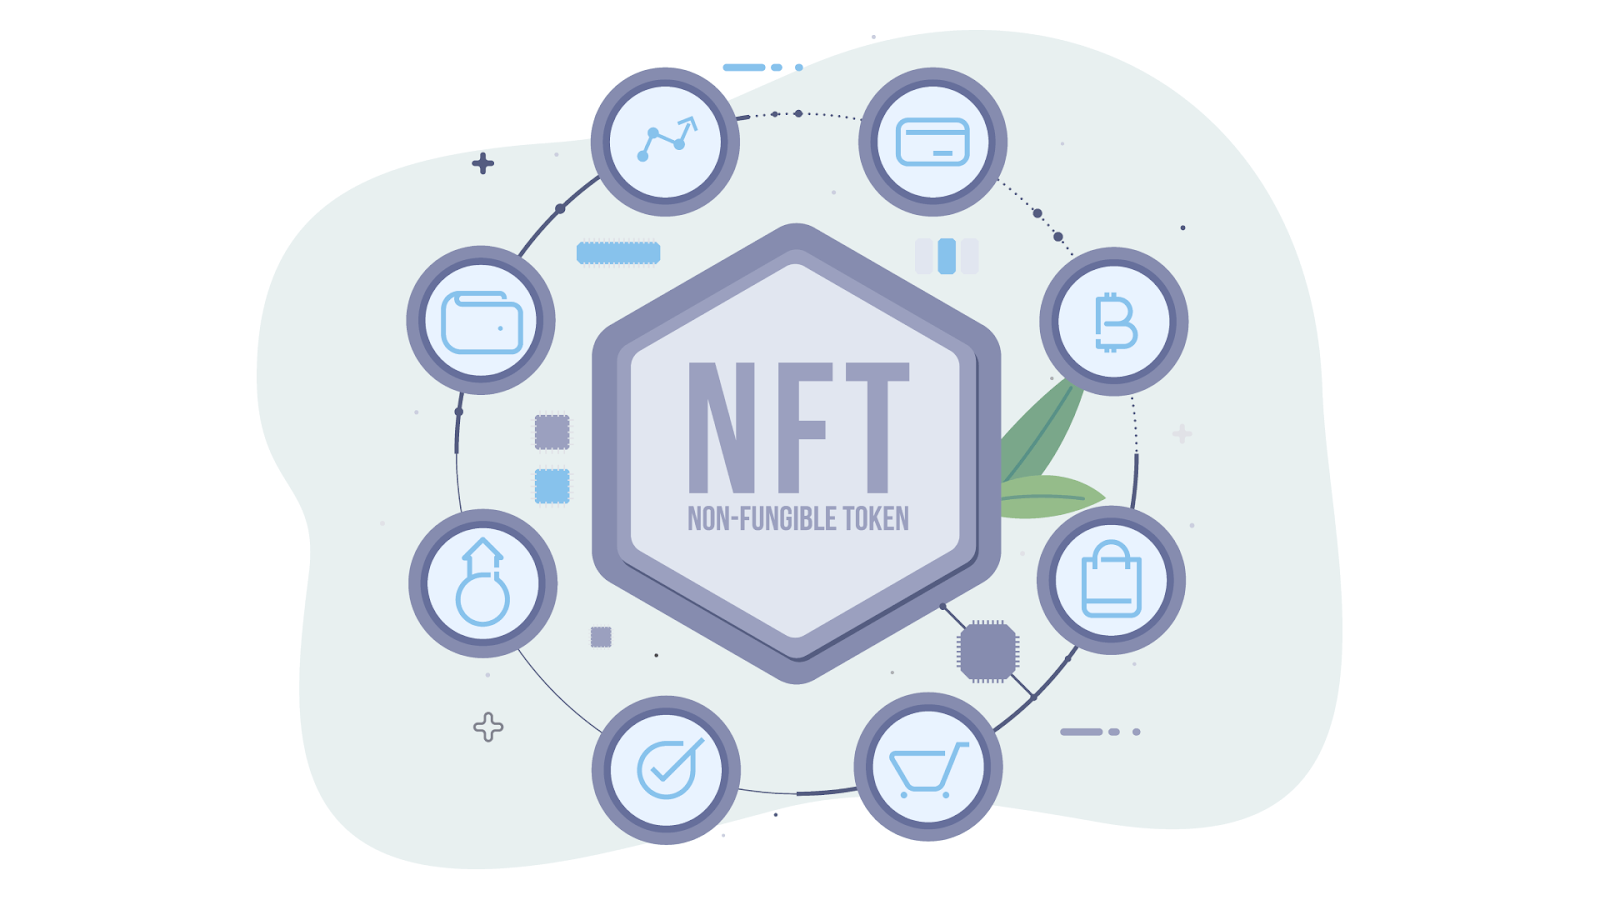 Anatomy of the top NFT marketplaces